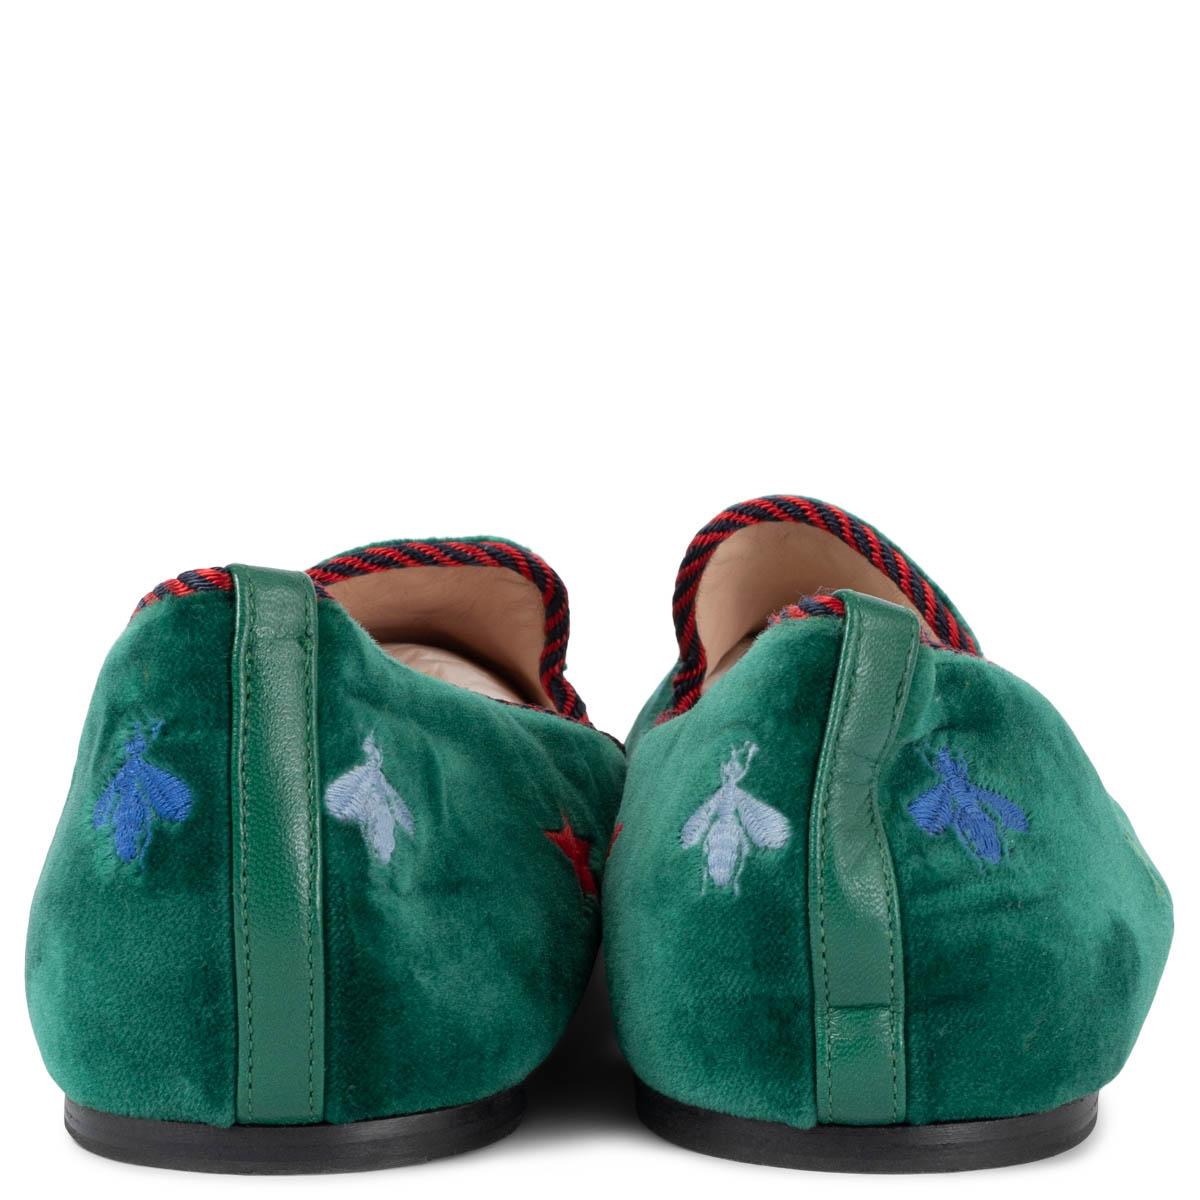 Women's GUCCI green velvet KIBI EMBROIDERED Loafers Shoes 38